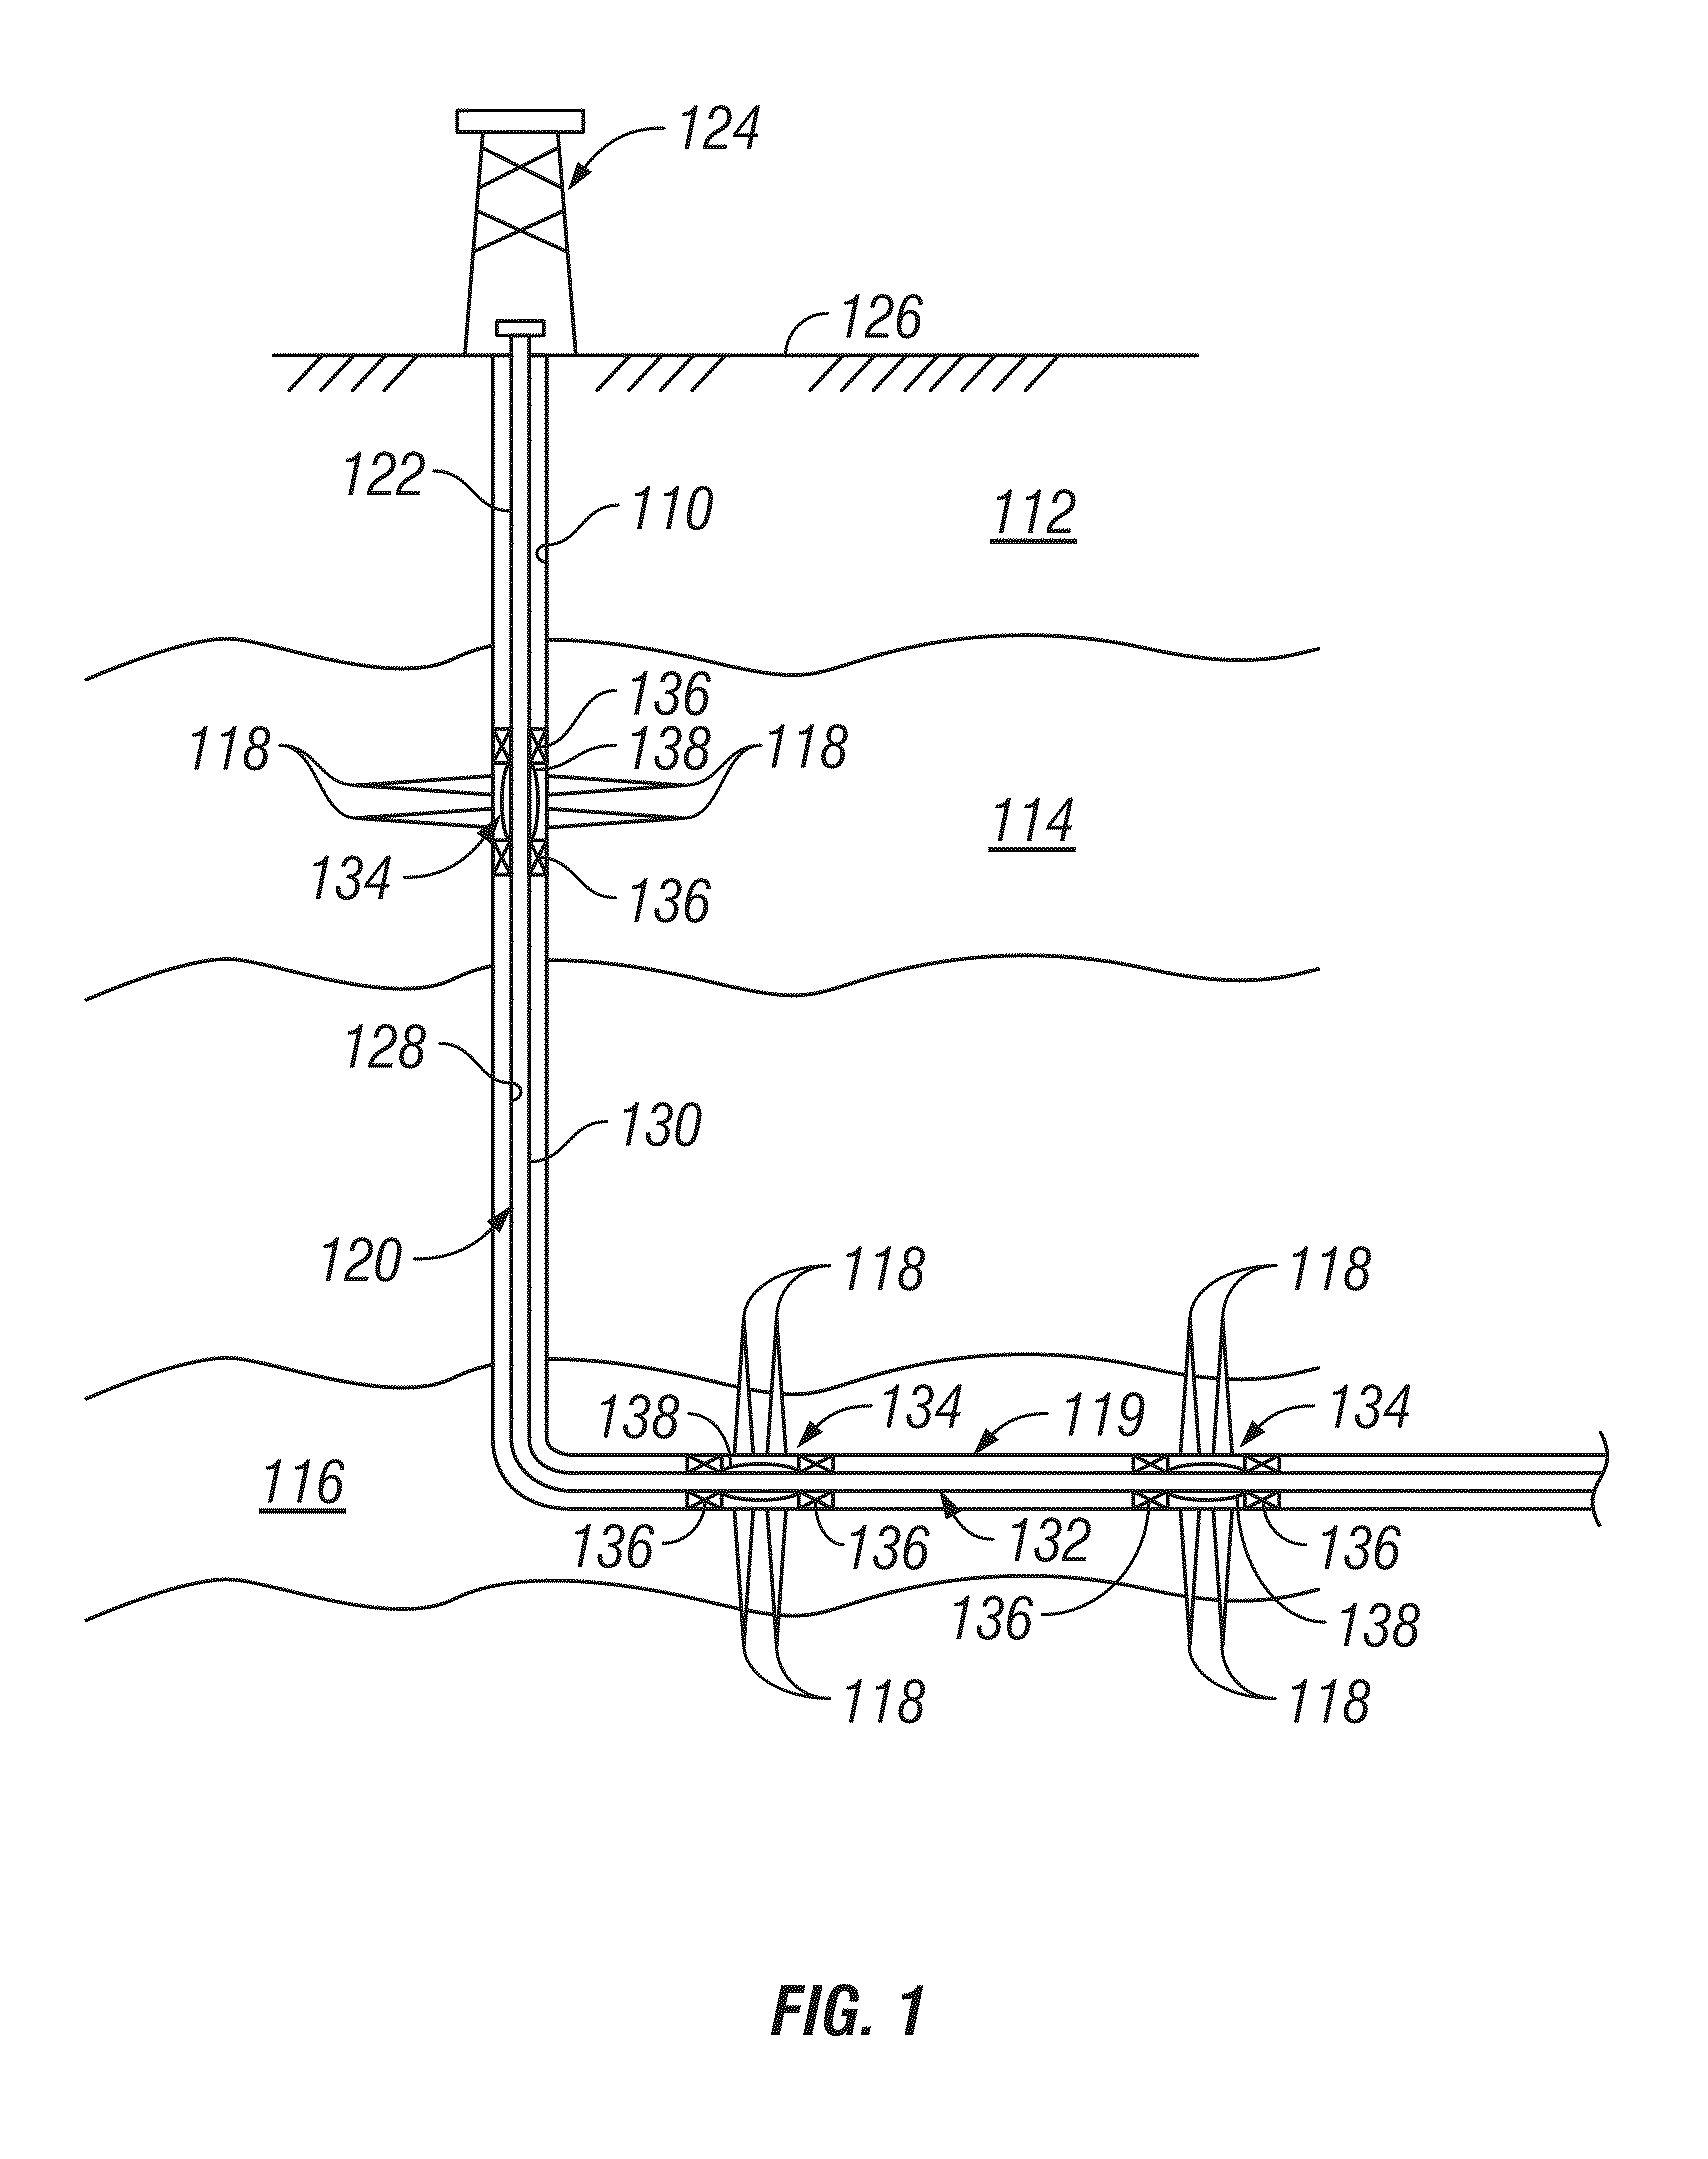 Method of making a flow control device that reduces flow of the fluid when a selected property of the fluid is in selected range